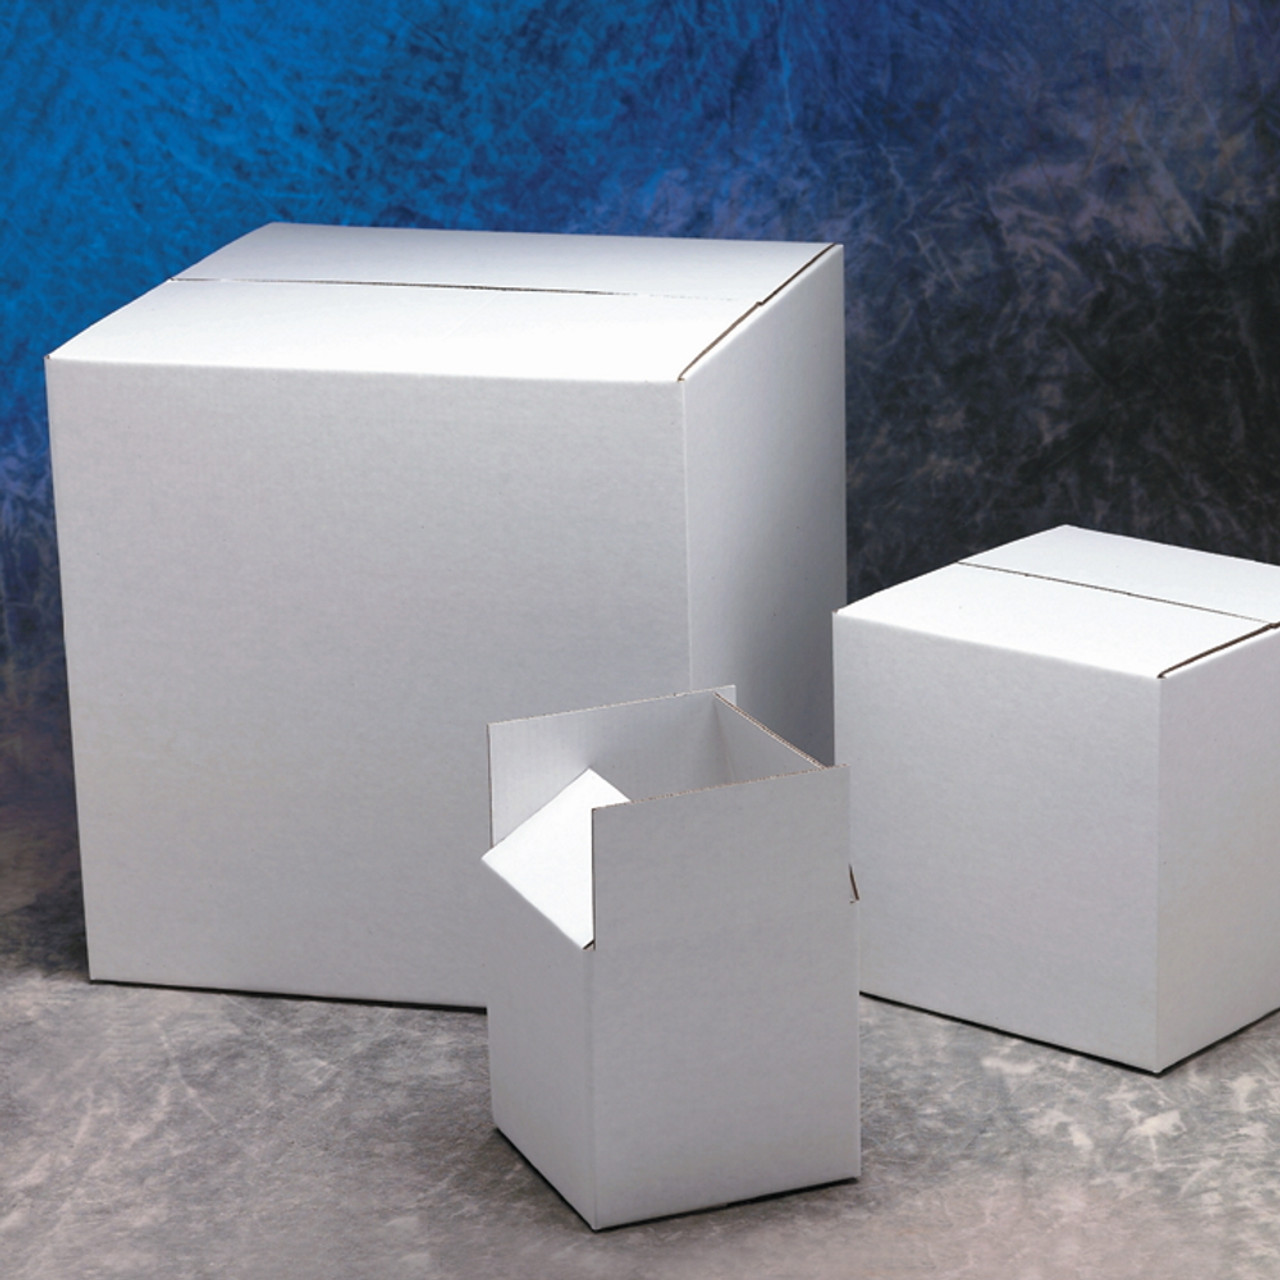 Tin Boxes - Retail Packaging Supplies and Boxes